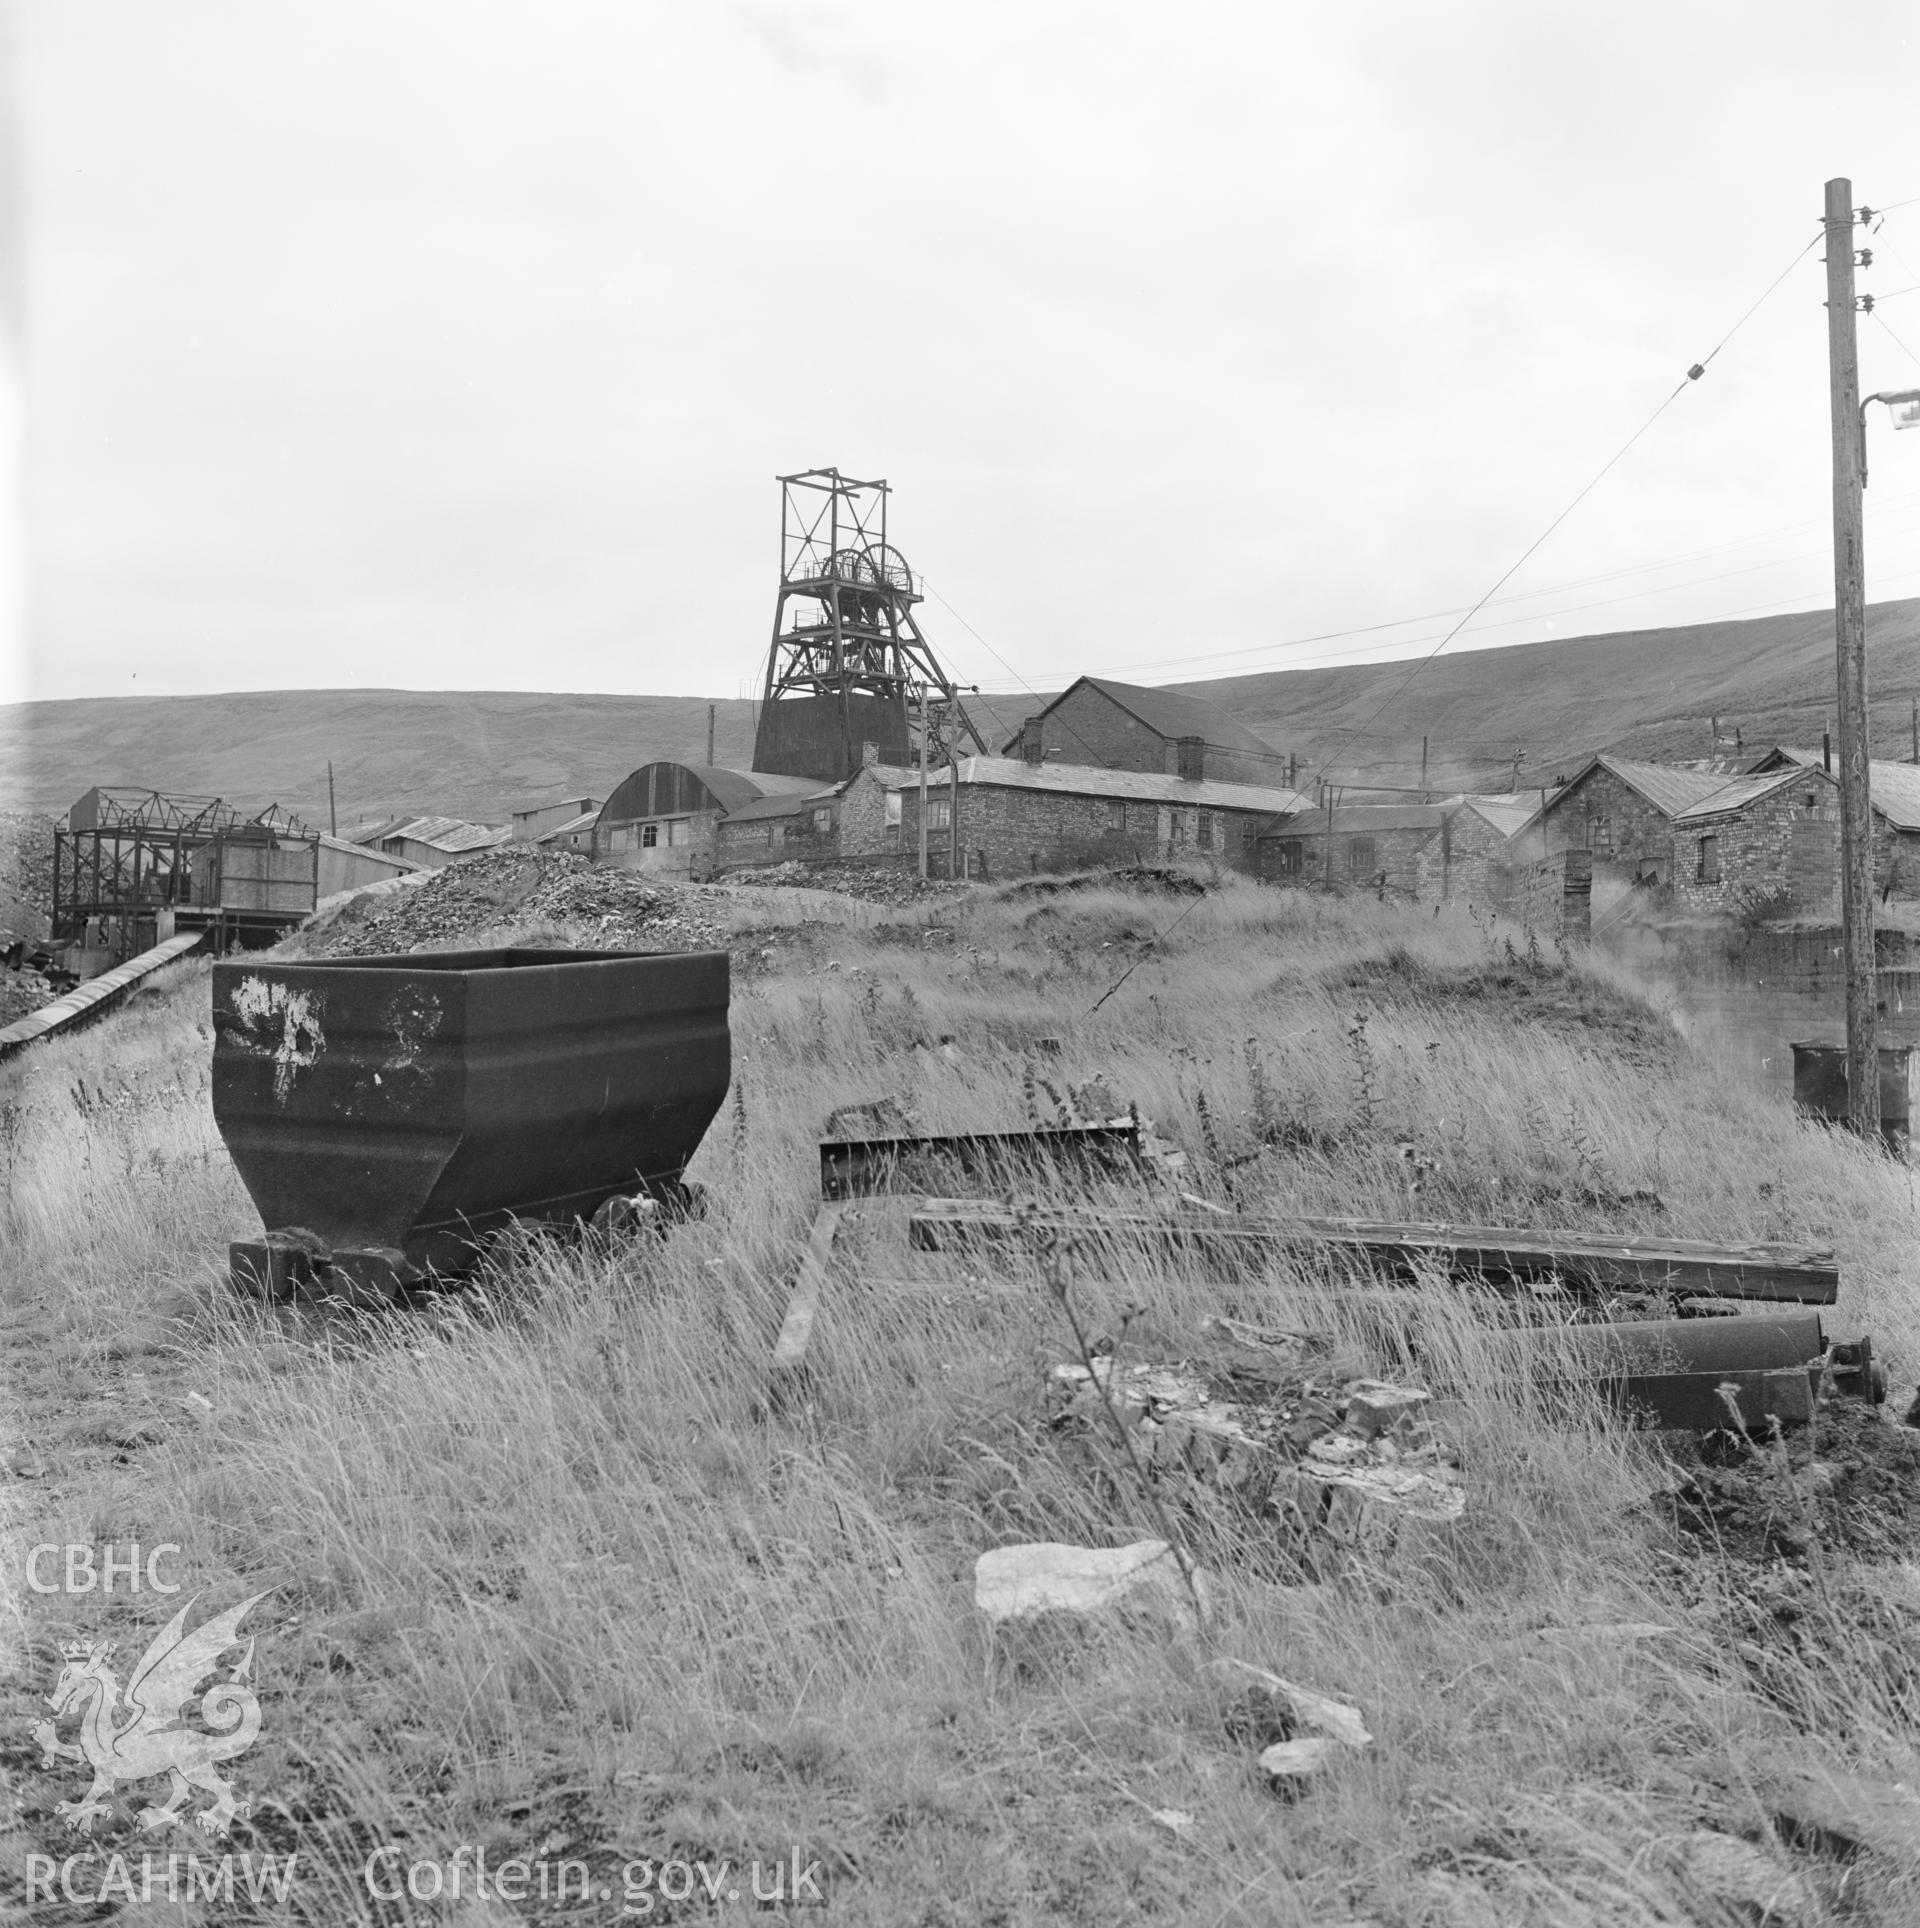 Digital copy of an acetate negative showing general view of Big Pit from south, from the John Cornwell Collection.